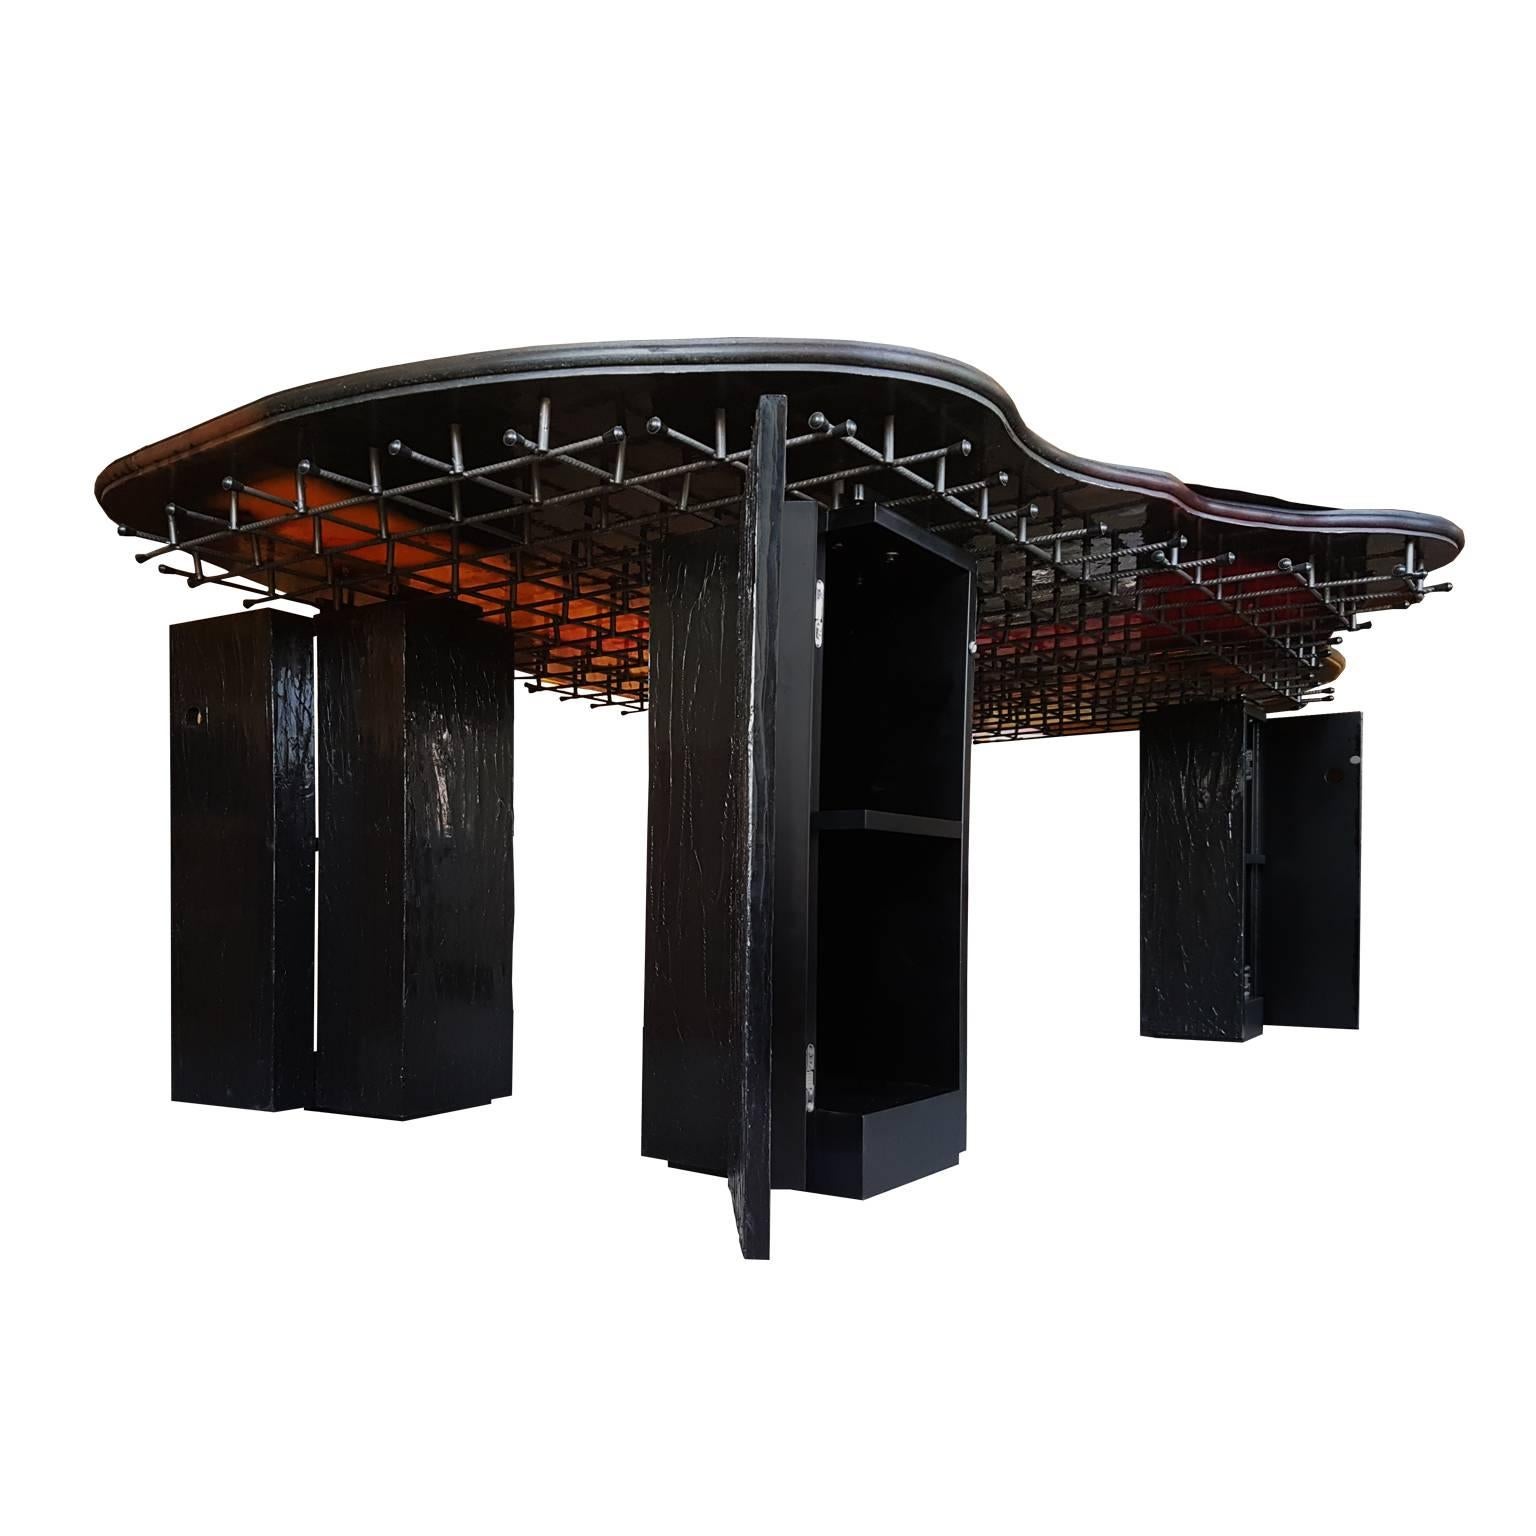 Gaetano Pesce Italian Dining Table with Resin Top and Black Wood Legs In Excellent Condition For Sale In Mornico al Serio ( BG), Lombardia